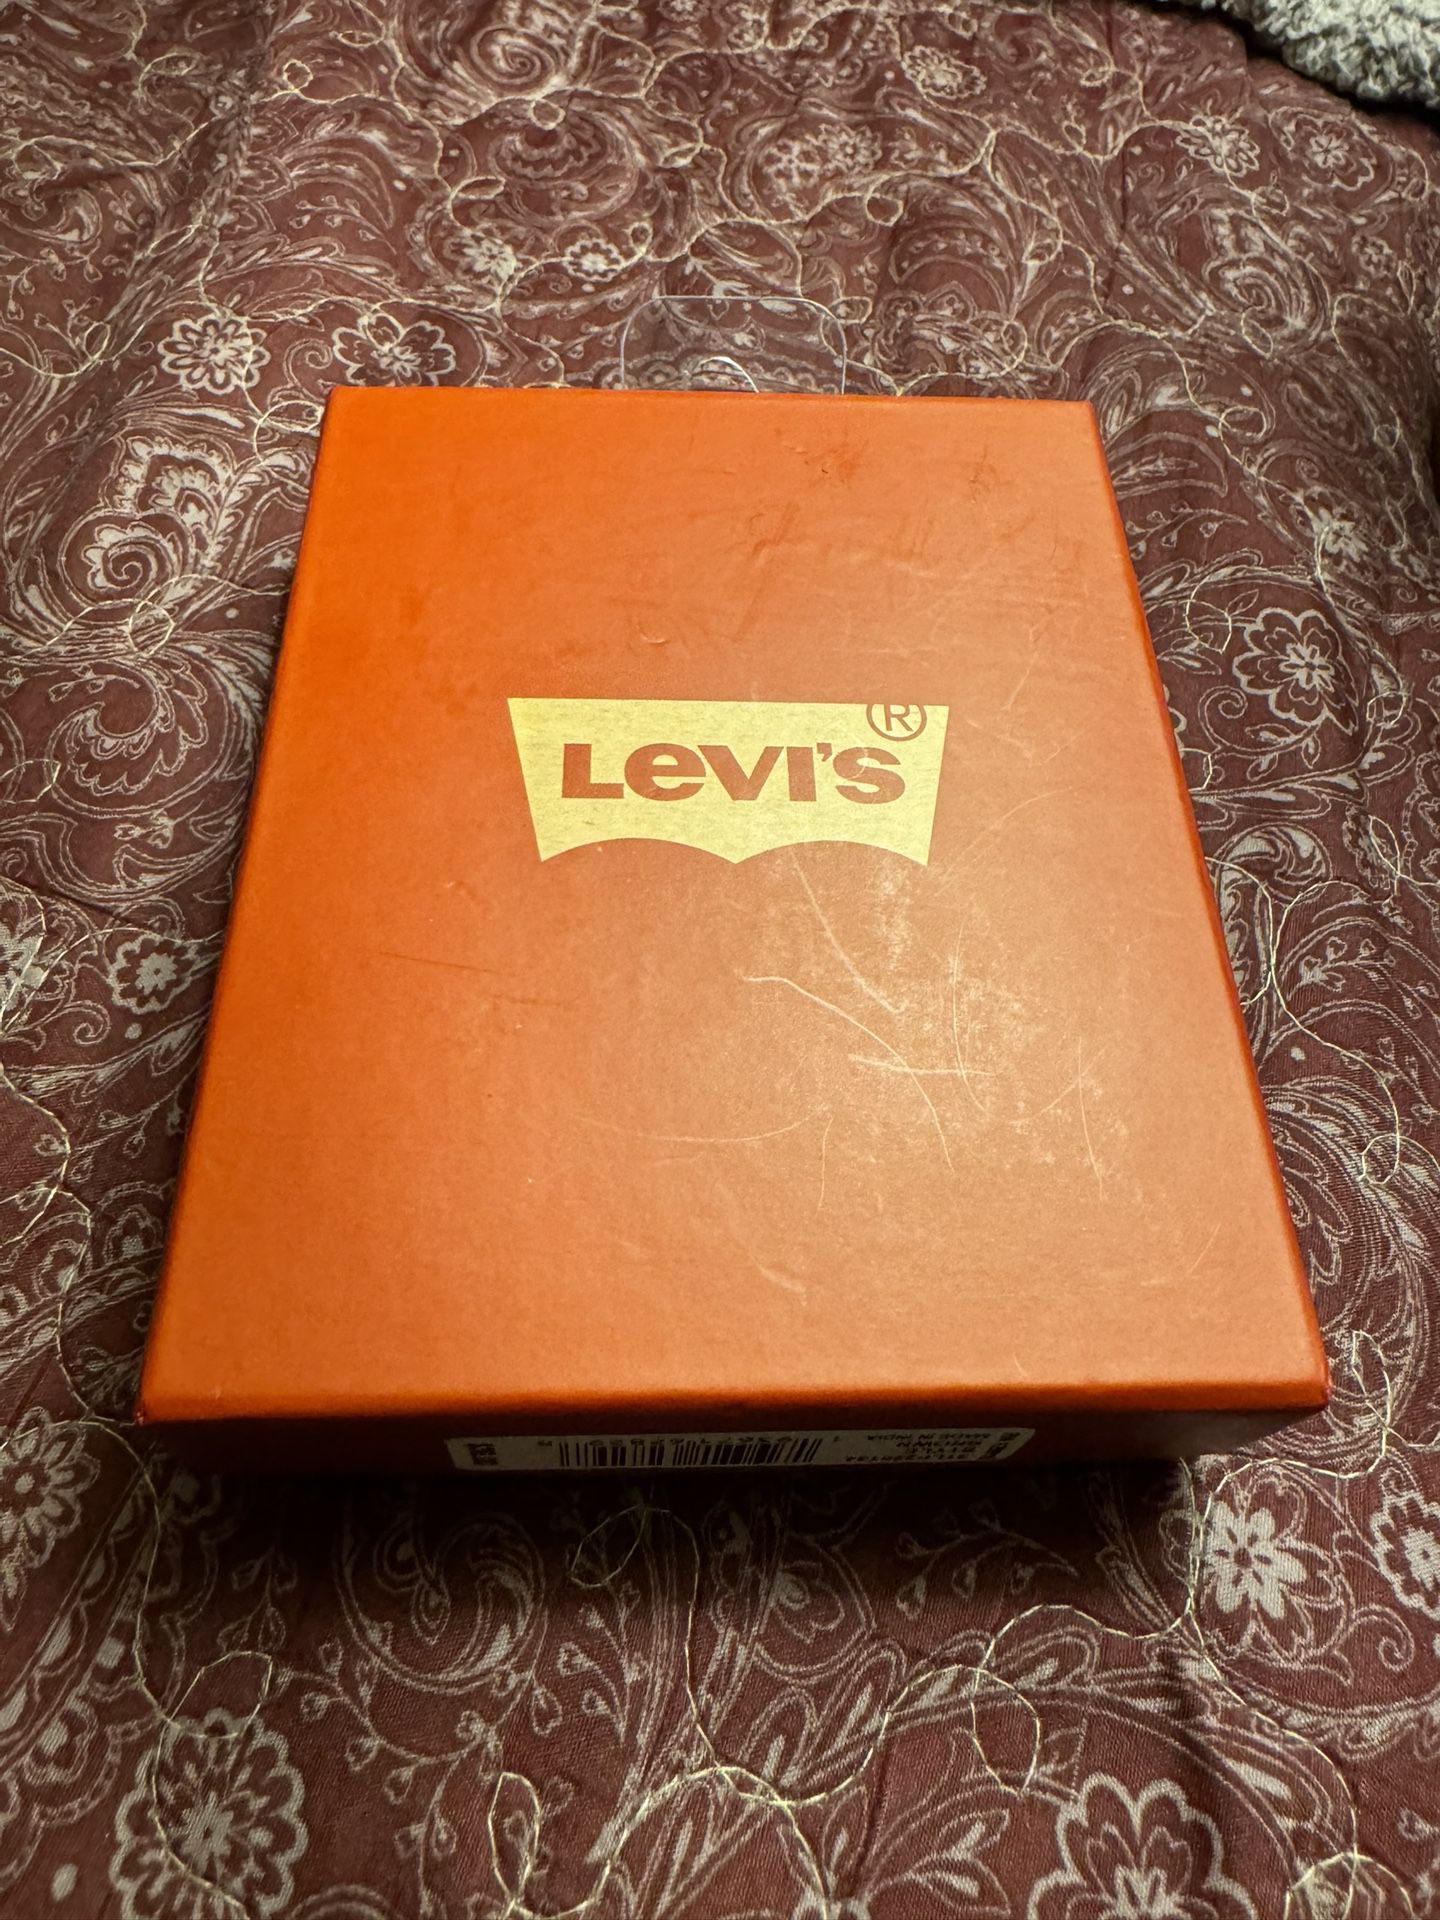 Levi’s Wallet Leather